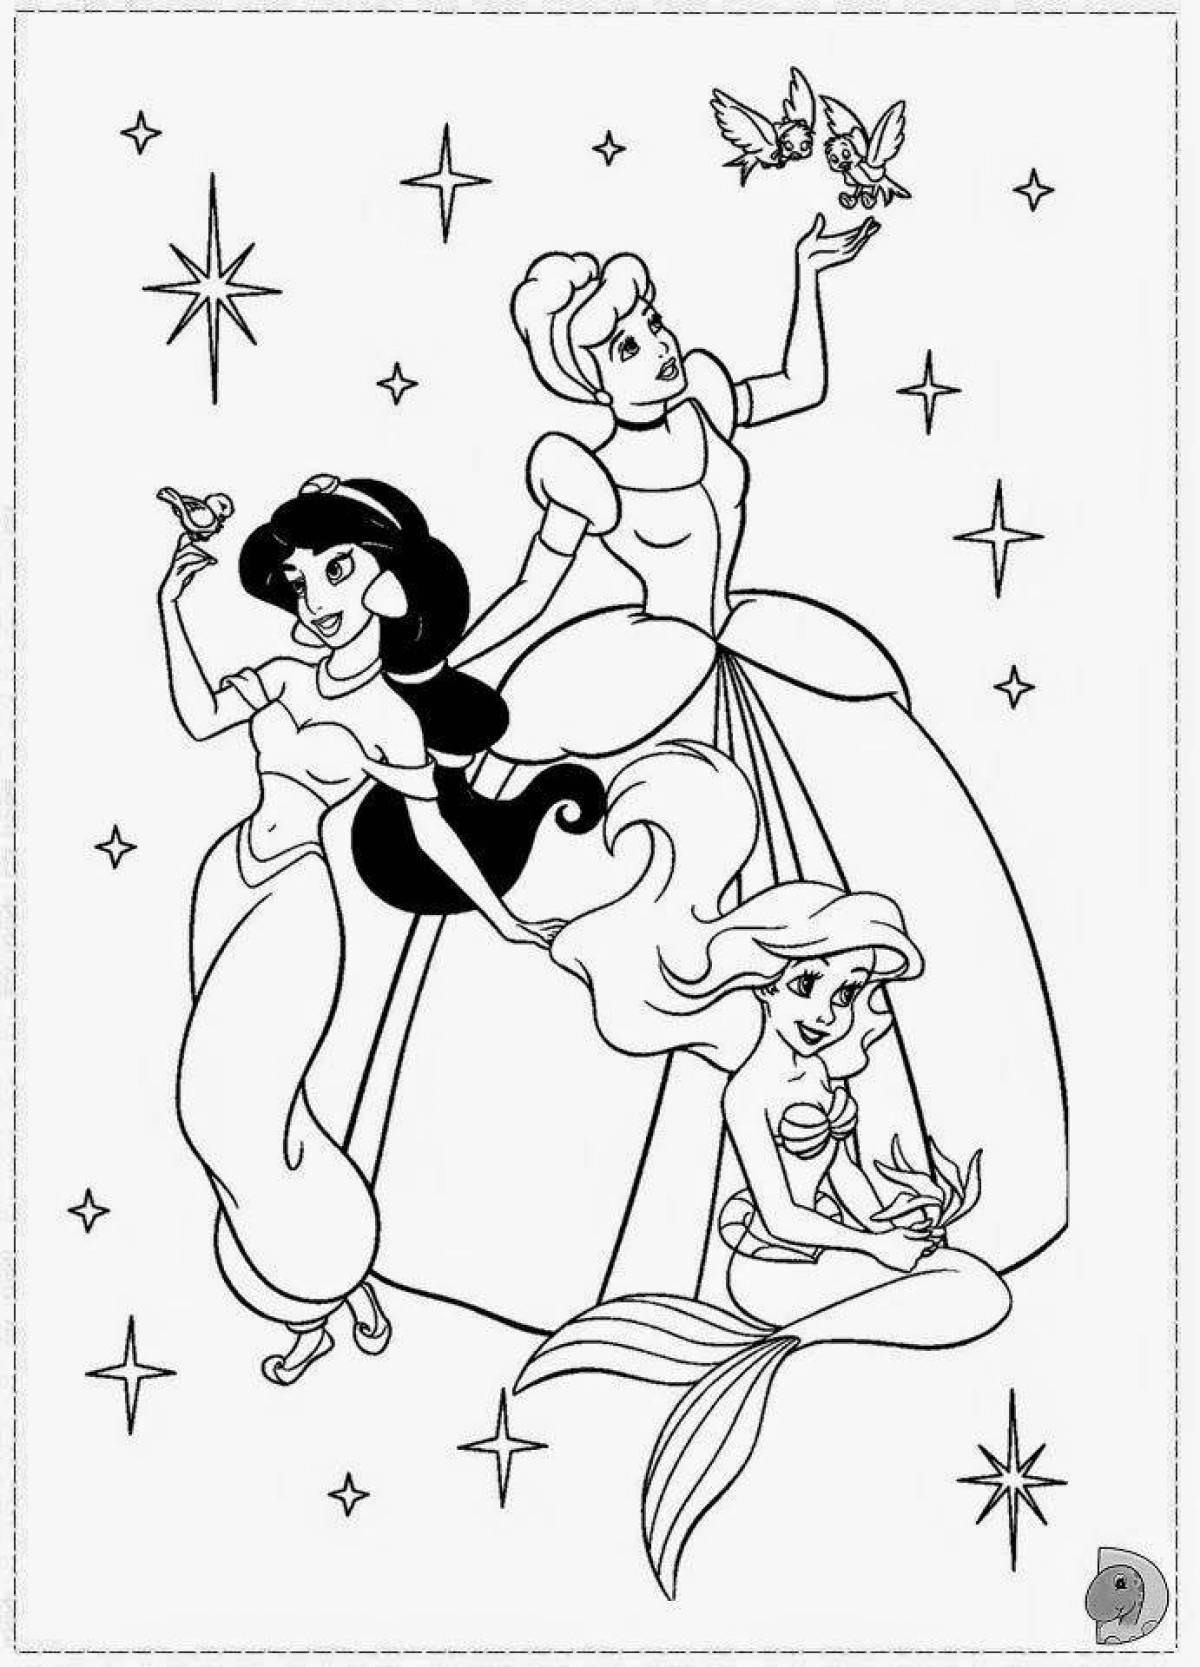 Disney blissful coloring book for girls